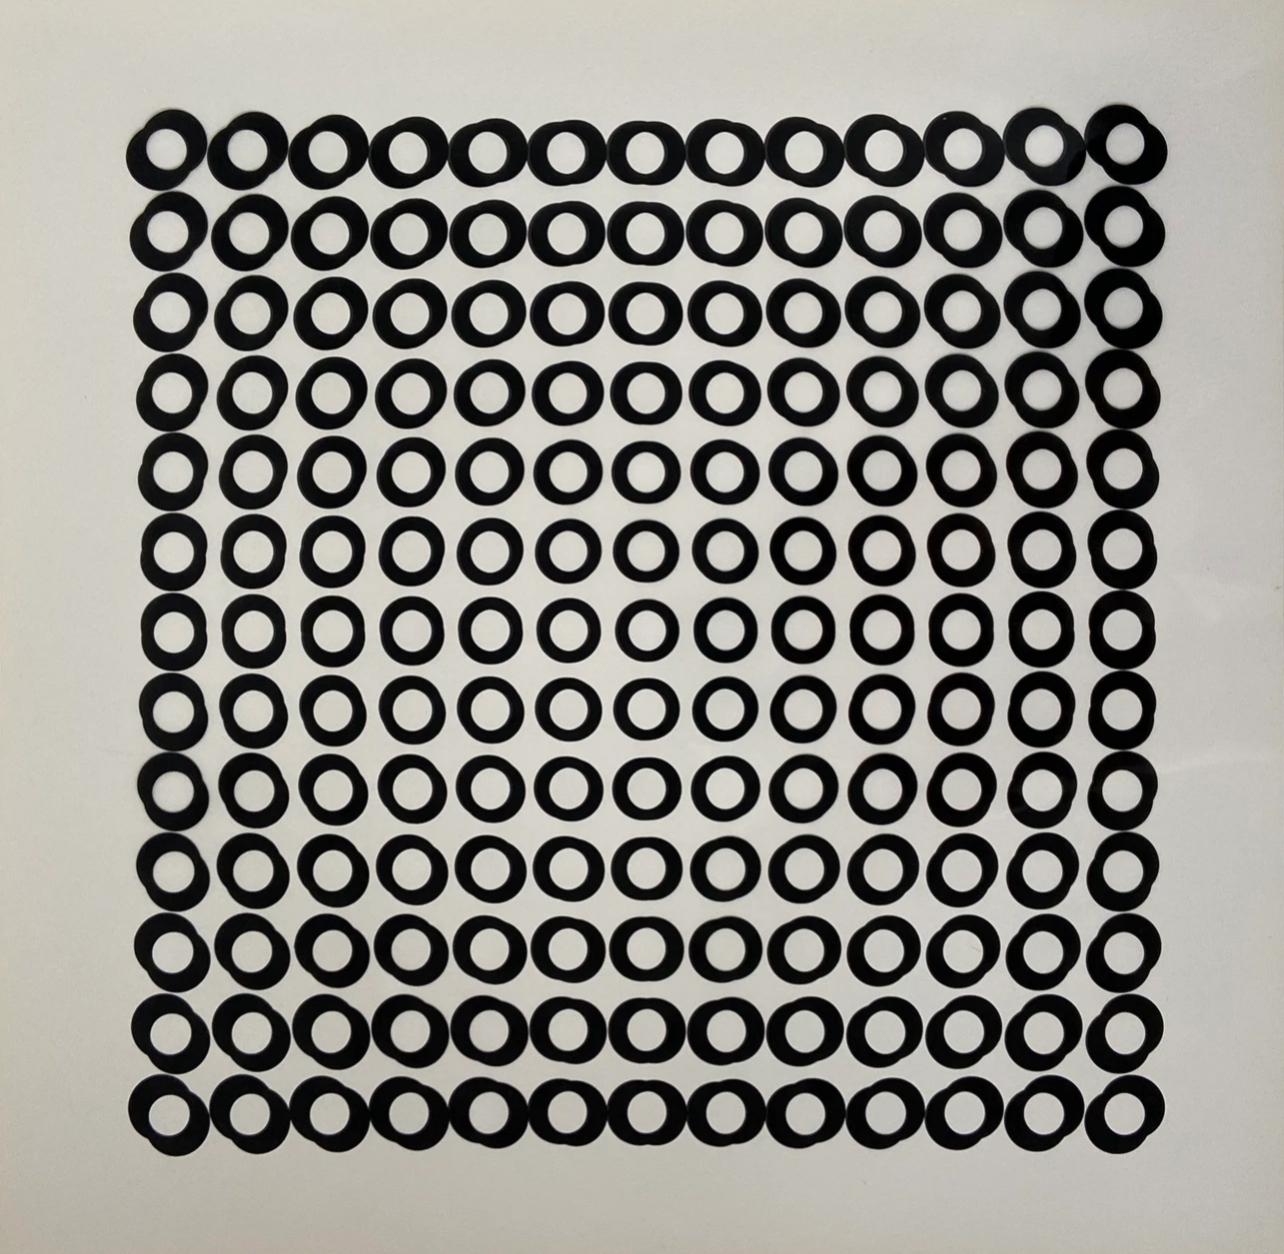 Victor Vasarely Abstract Print - Vasarely, Composition, Tiefenbilder (after)